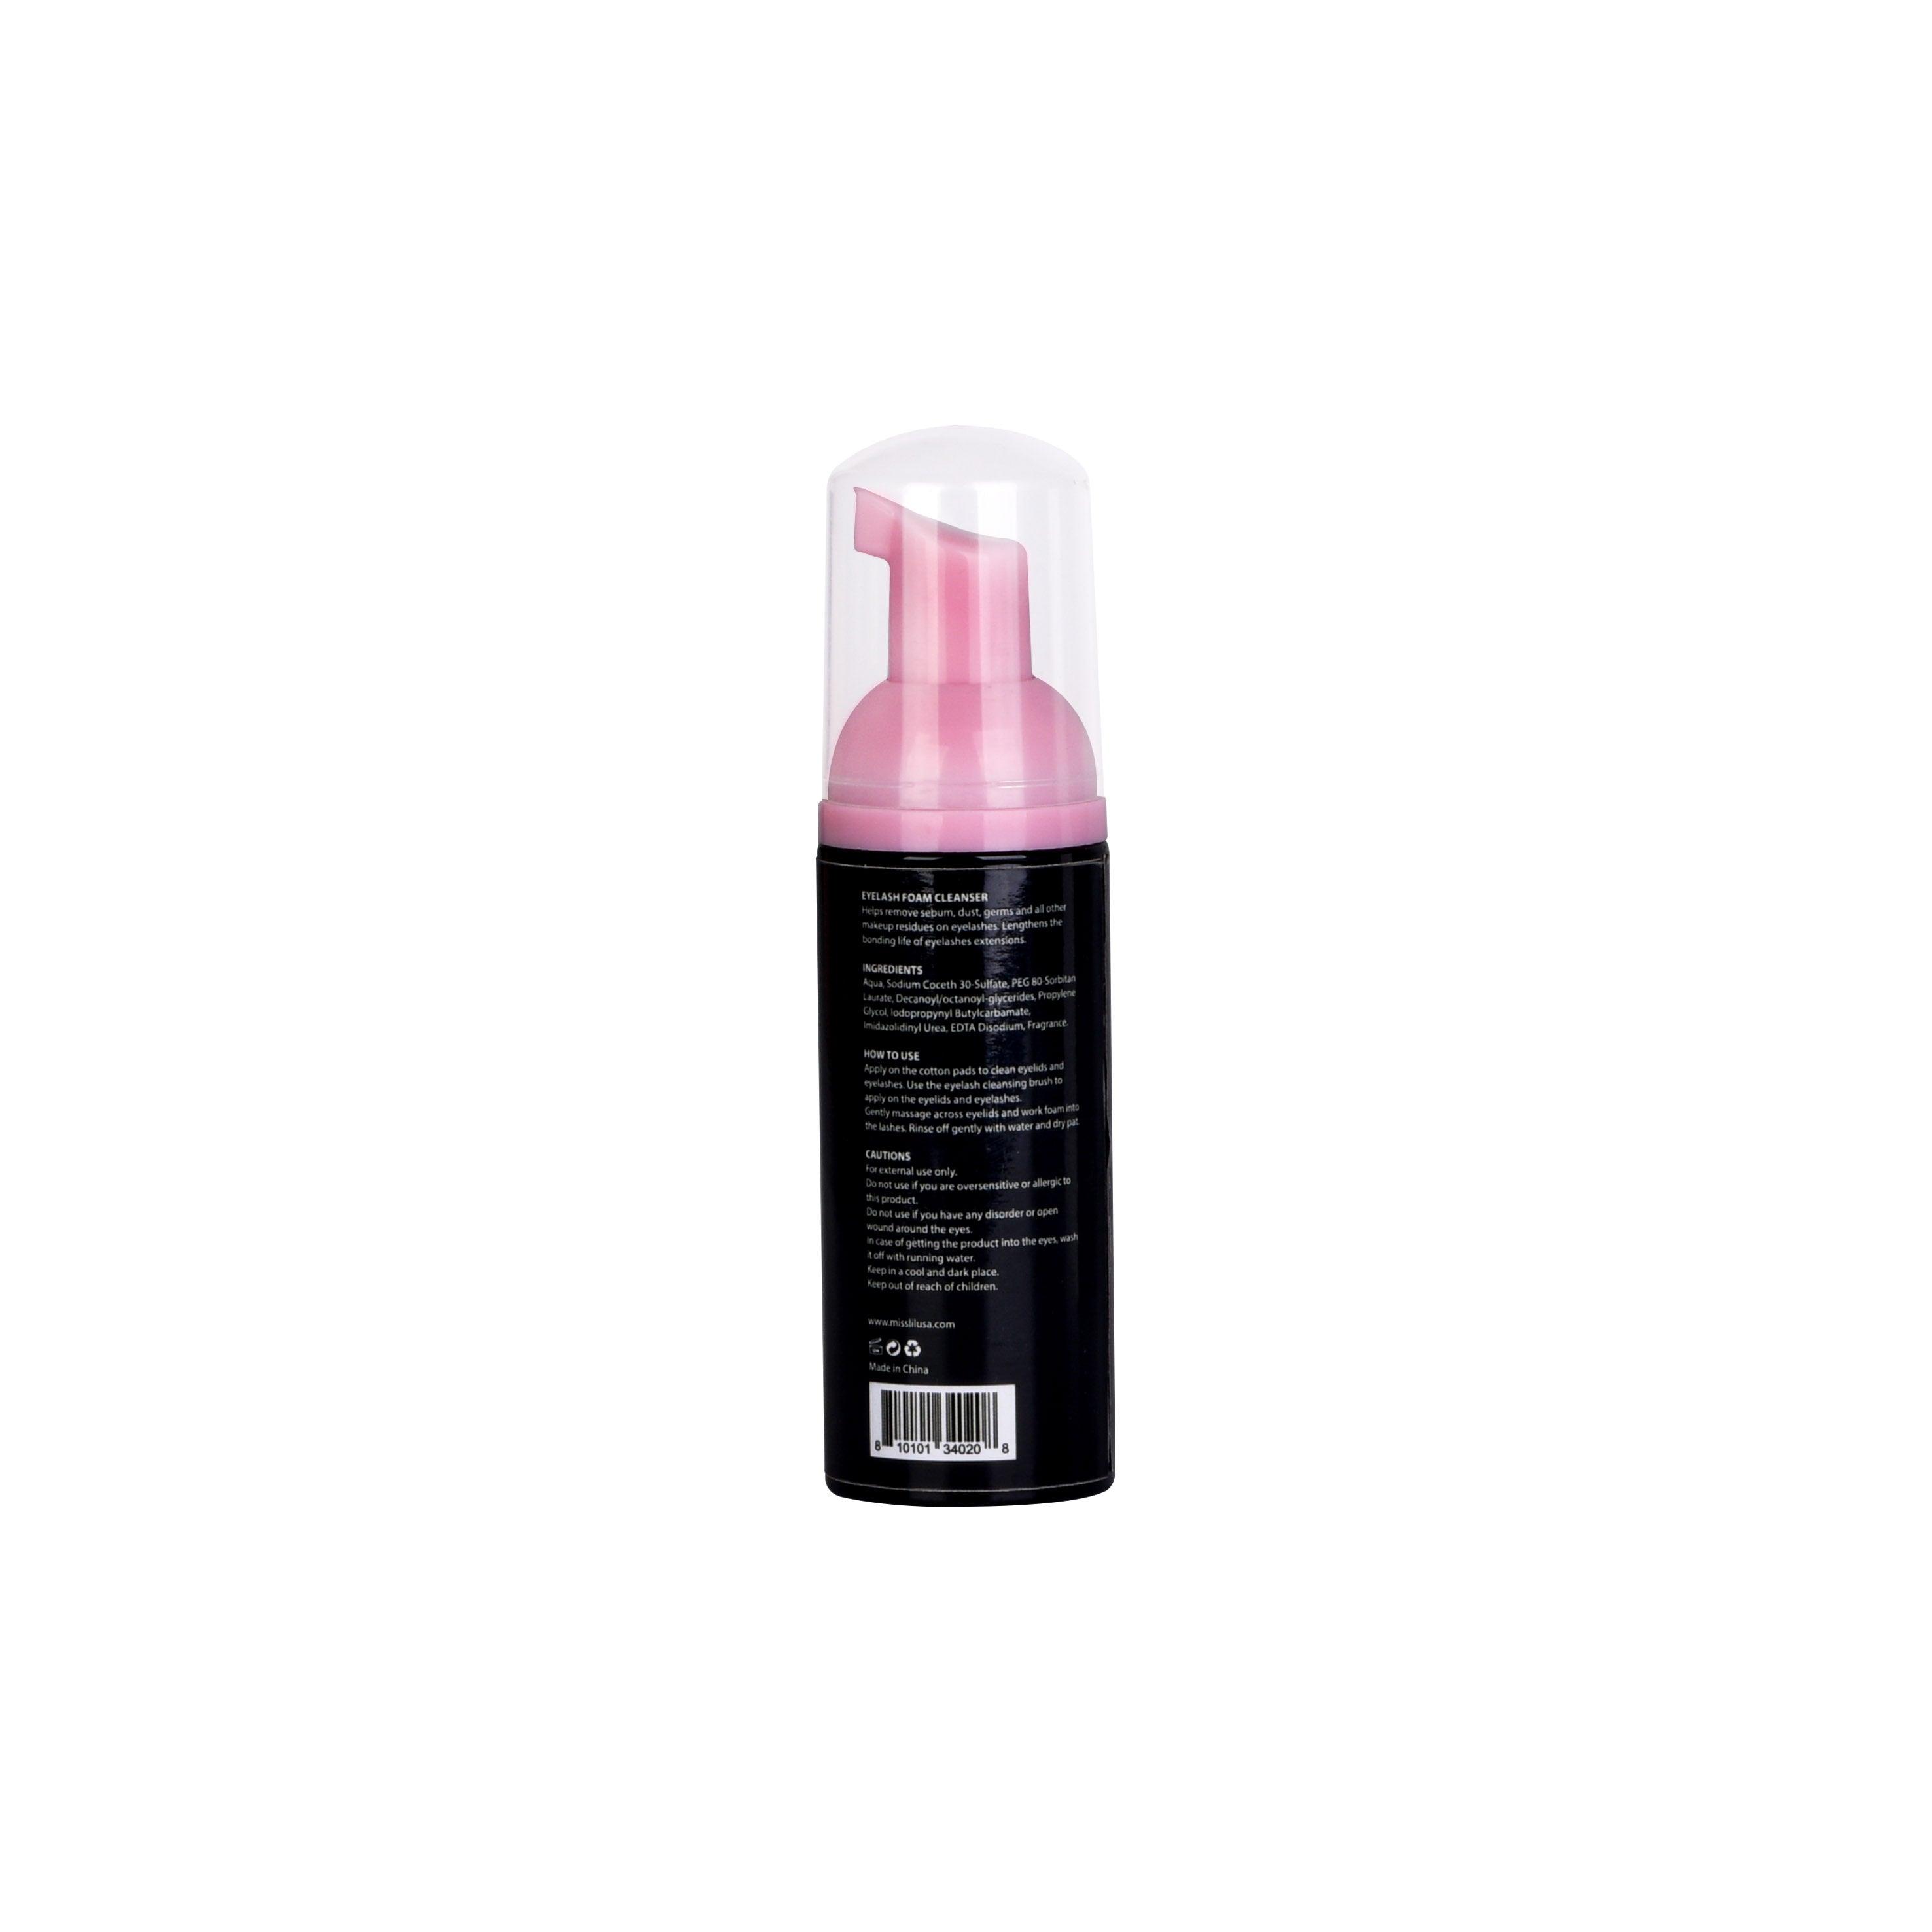 Foam lash cleaner and eye make-up remover for extension service and aftercare - Miss Lil USA